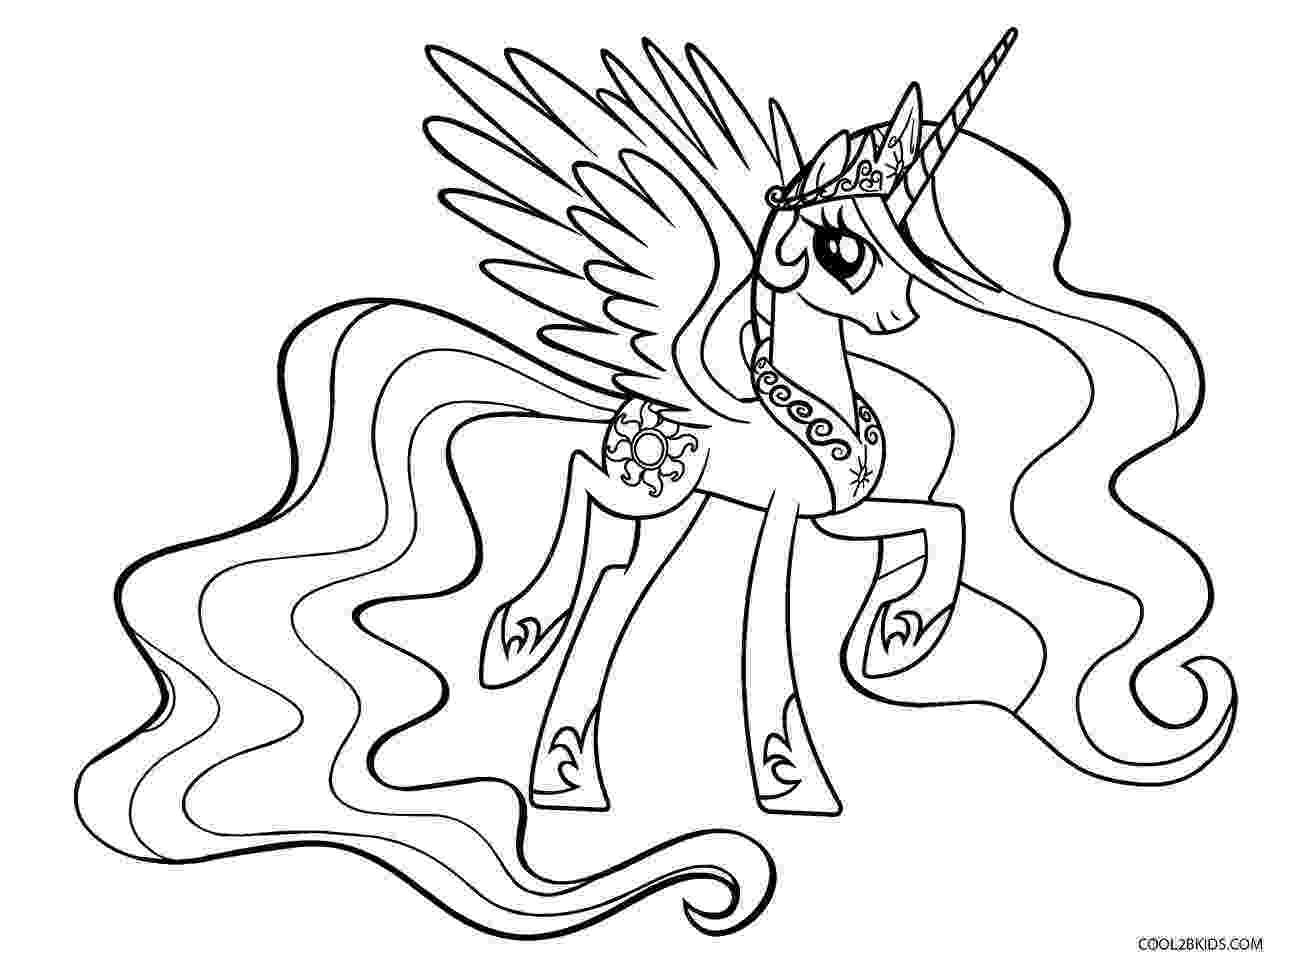 my little pony coloring pictures rainbow dash coloring page clipart panda free clipart pictures pony my little coloring 